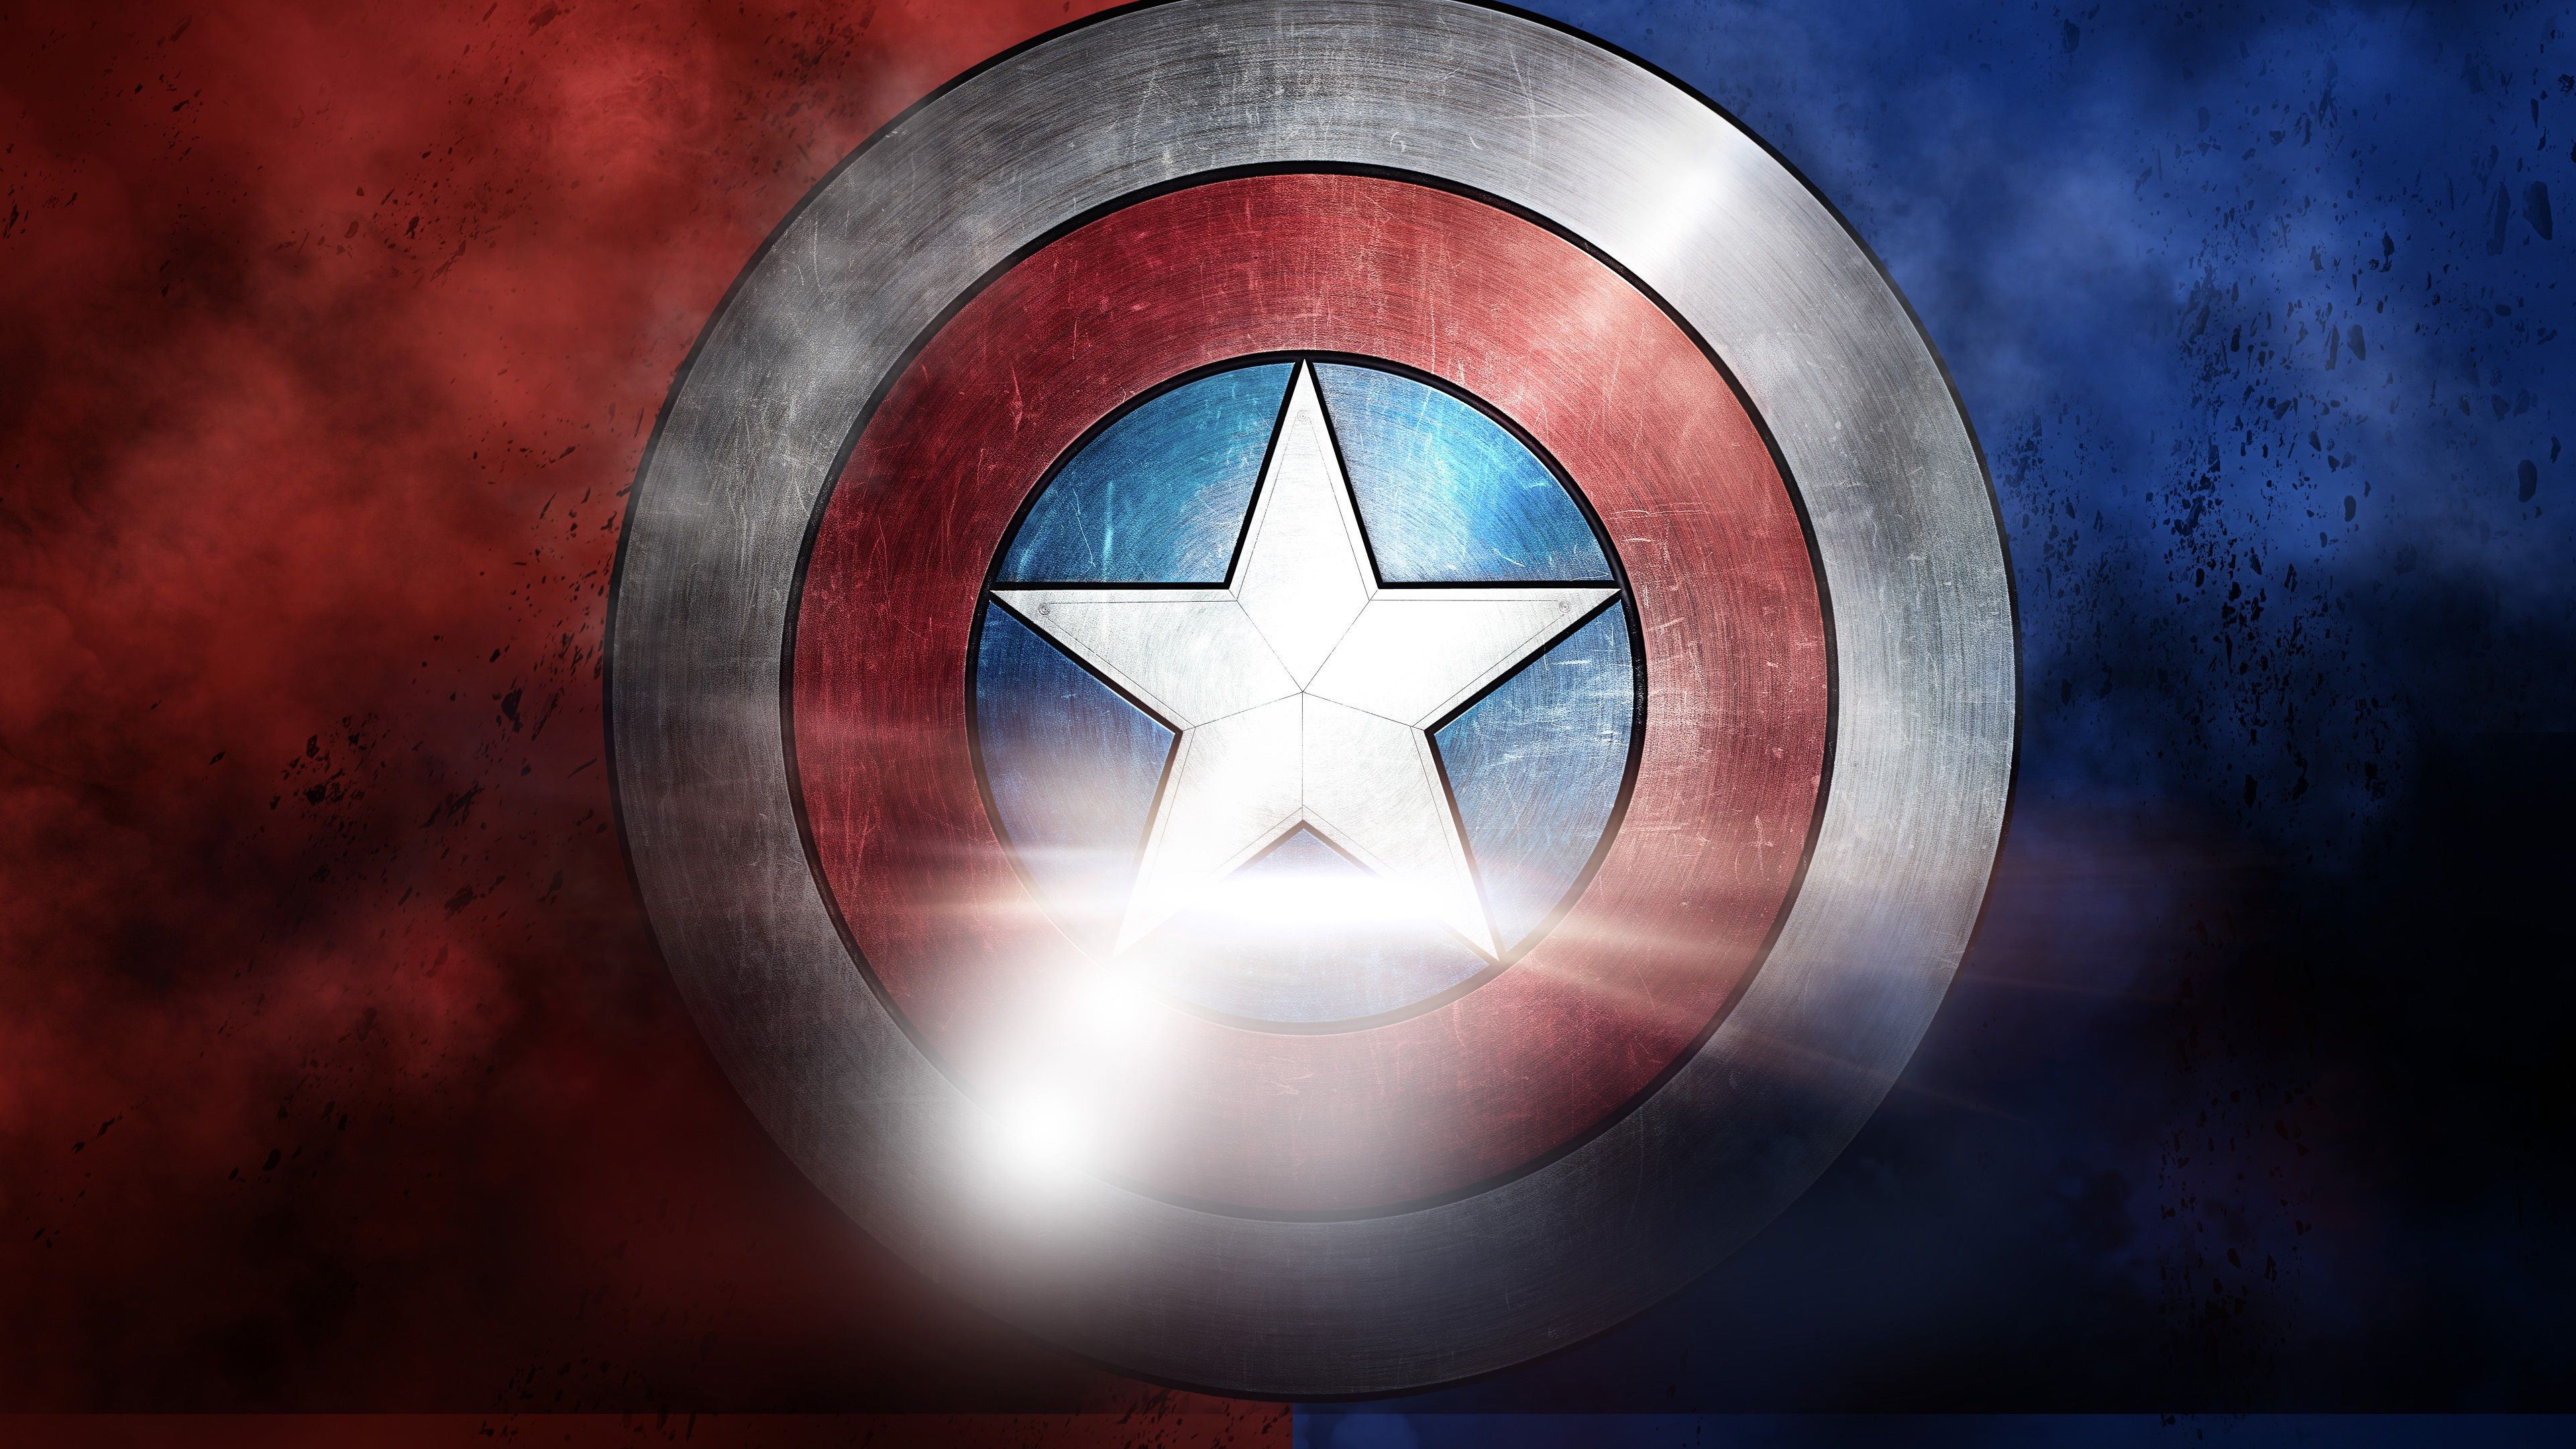 Heres a couple of Captain America Wallpapers Feel free to use them   rMarvel